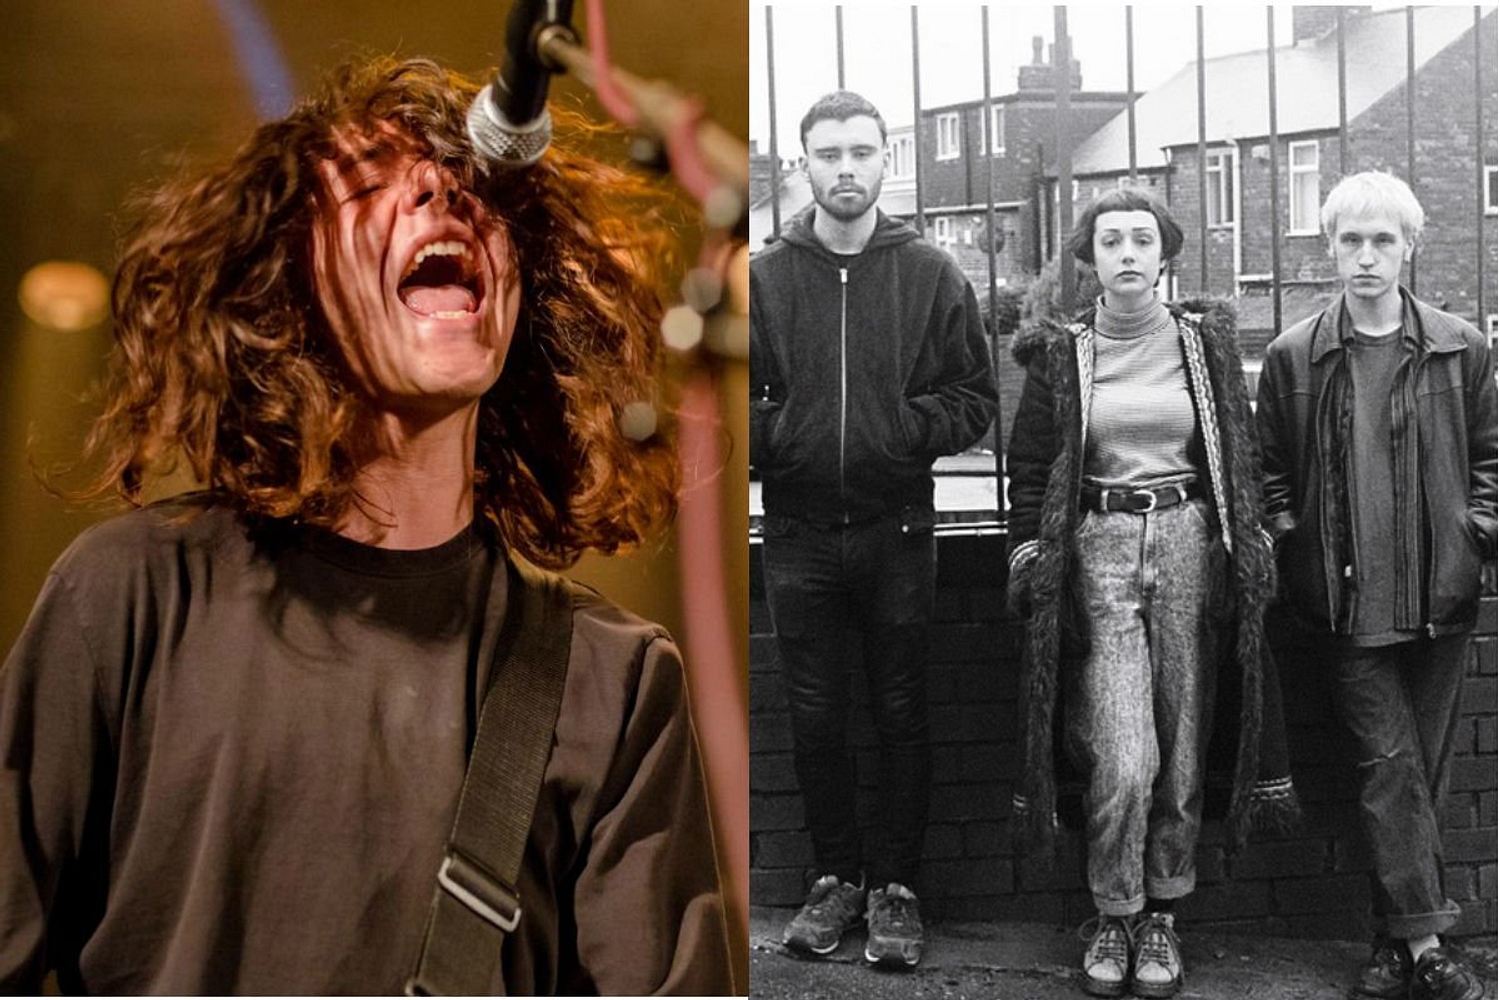 Versus: The Wytches and Kagoule grill each other ahead of All Years Leaving 2015